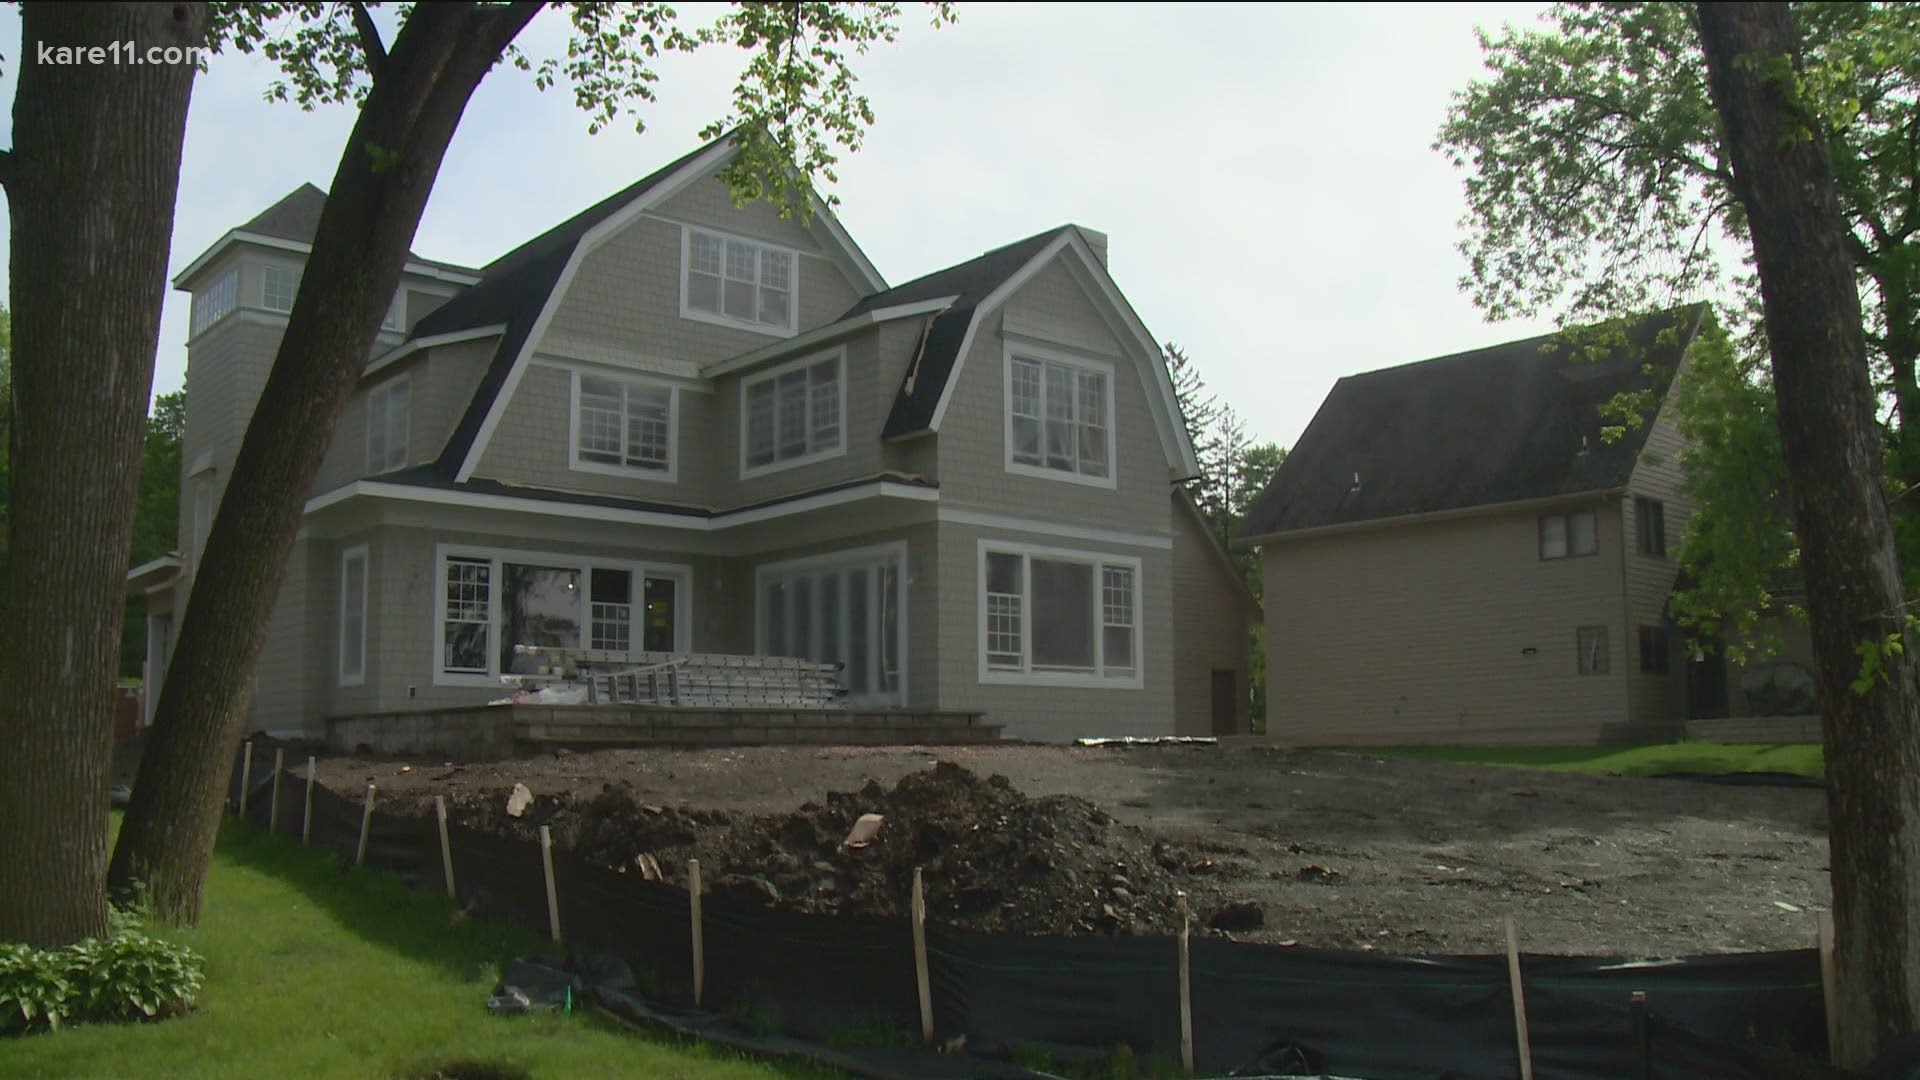 A local builder says the costs of materials keep rising, thanks to issues with the lumber mills.